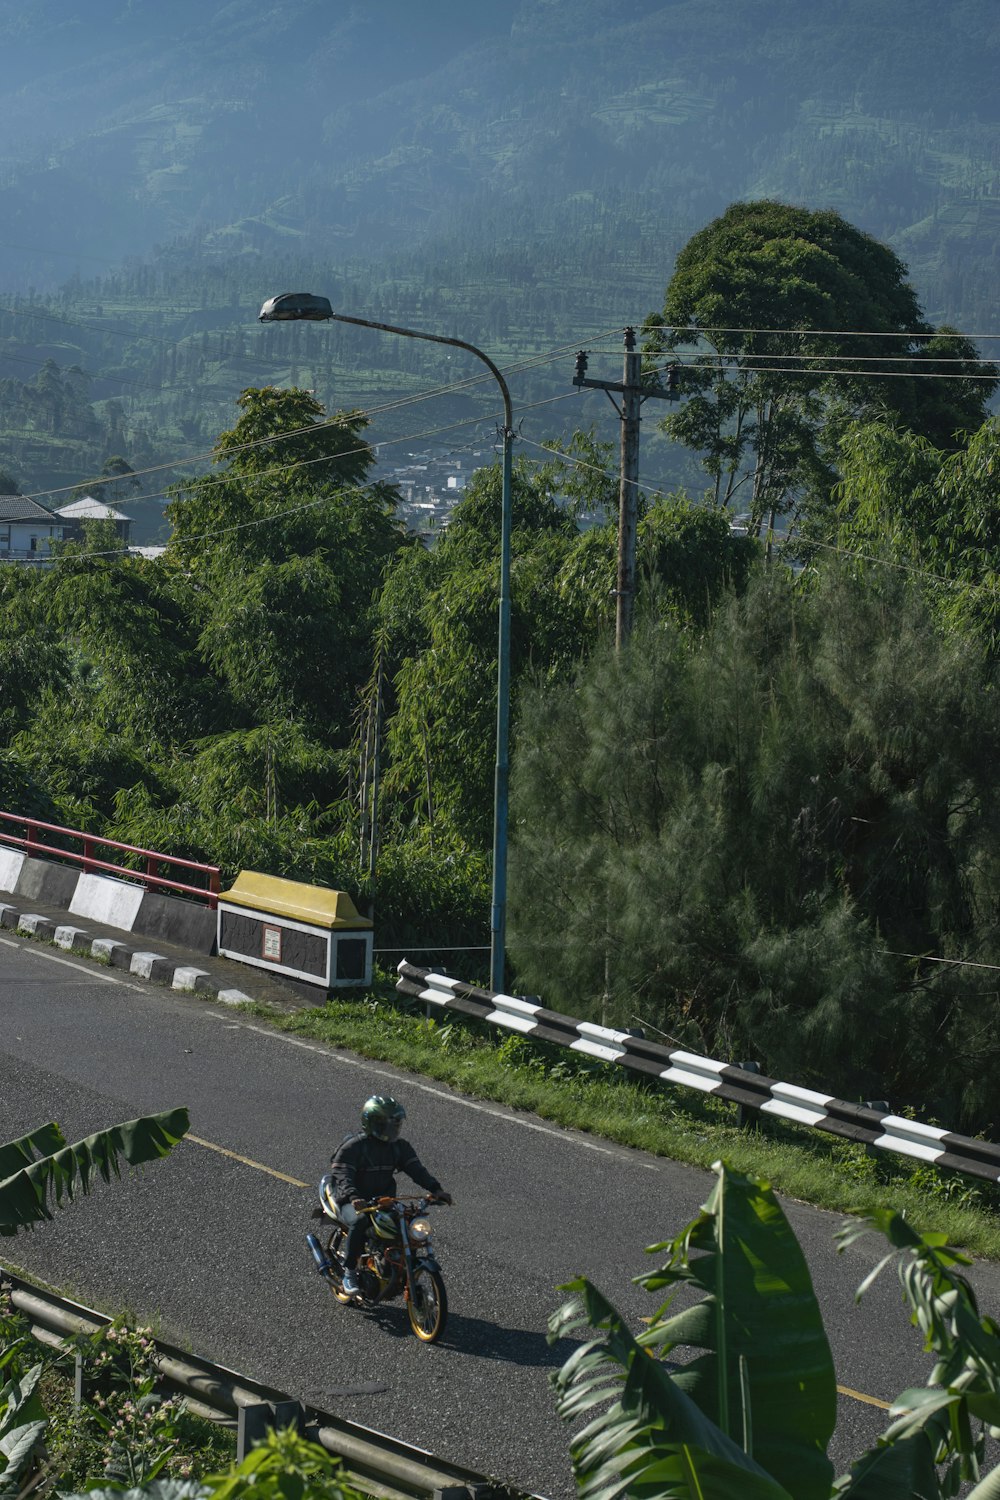 a person riding a motorcycle on a road with trees on either side